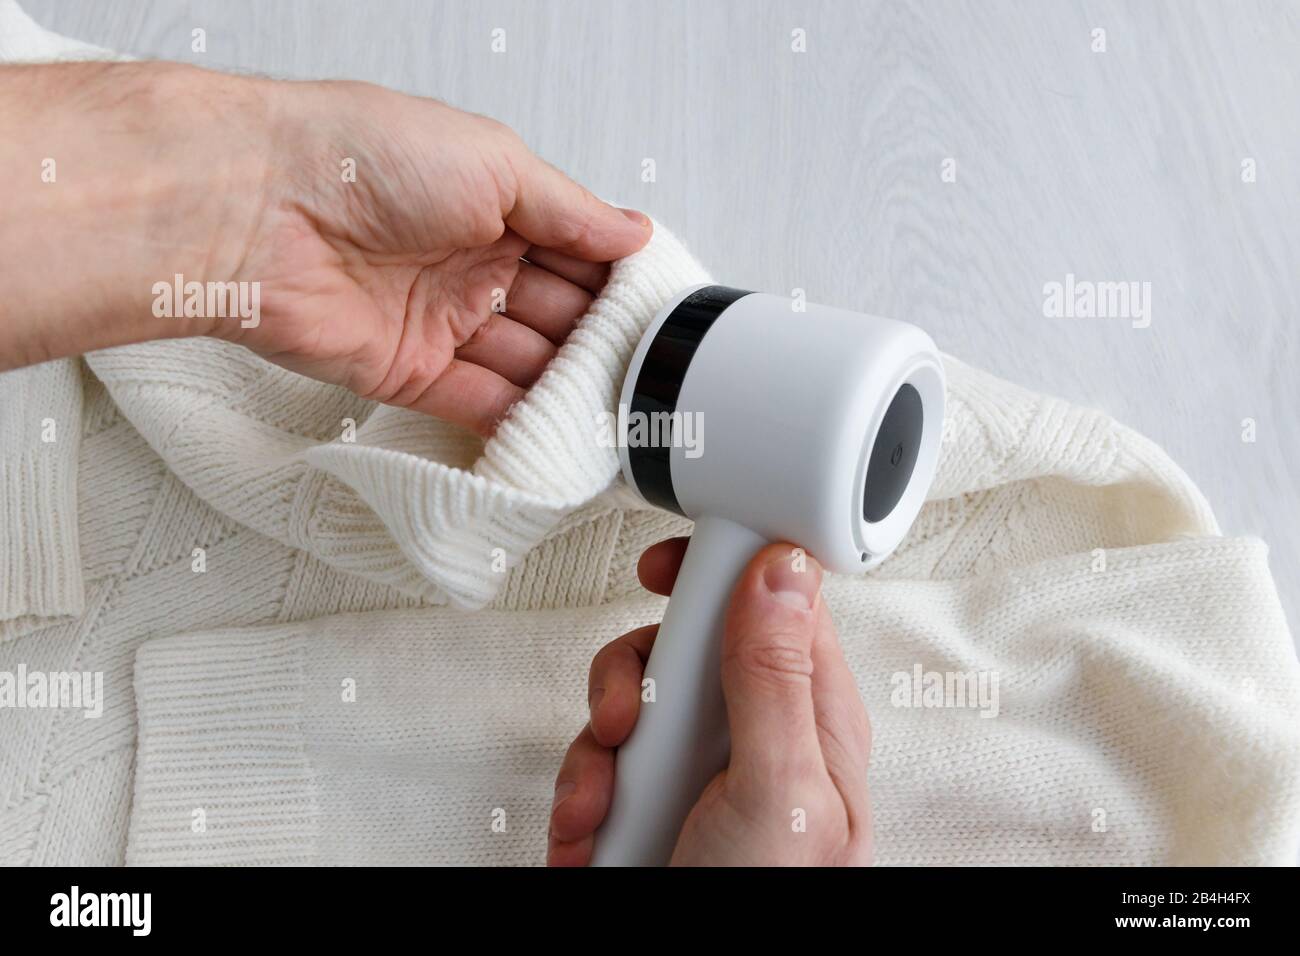 Man's hand holding a lint remover from a white acrylic or wool sweater. Electric device after cleaning and collected fluff/lint, light wooden backgrou Stock Photo